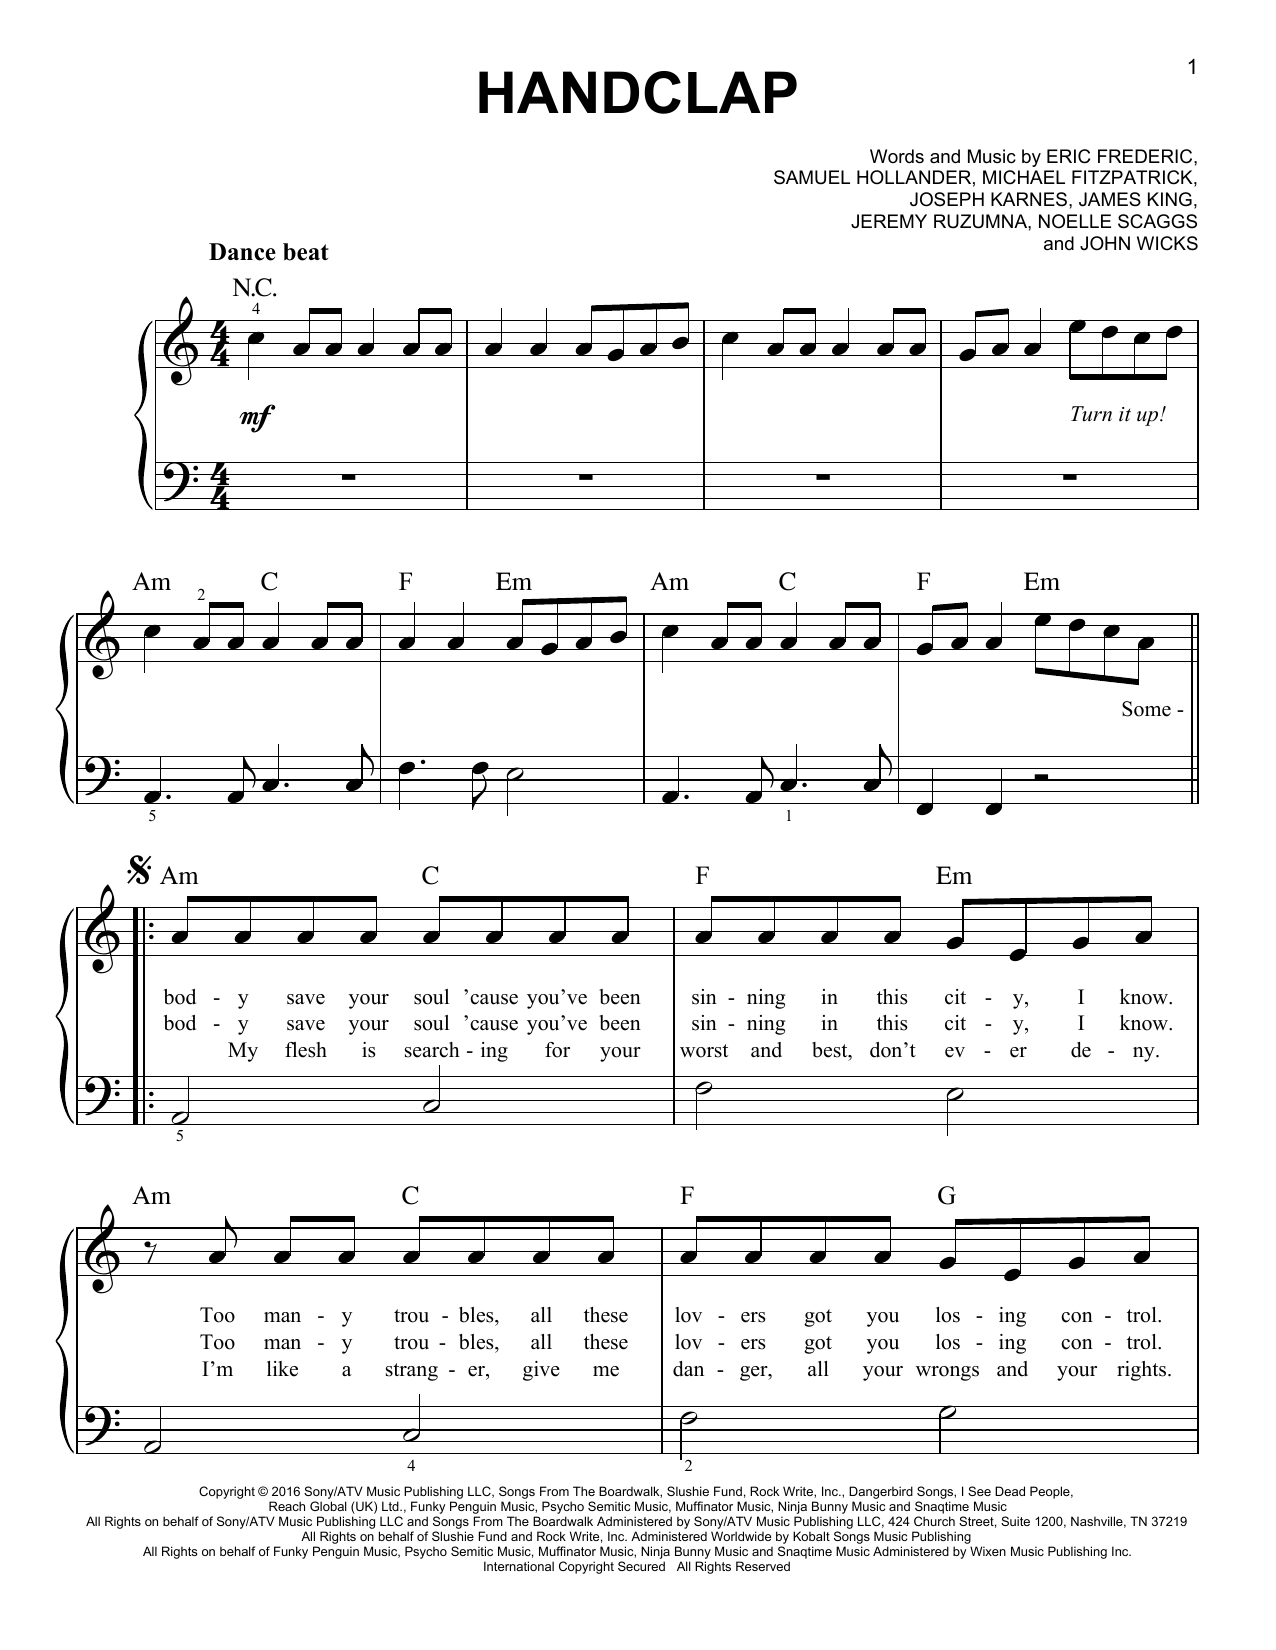 Download Fitz and the Tantrums HandClap Sheet Music